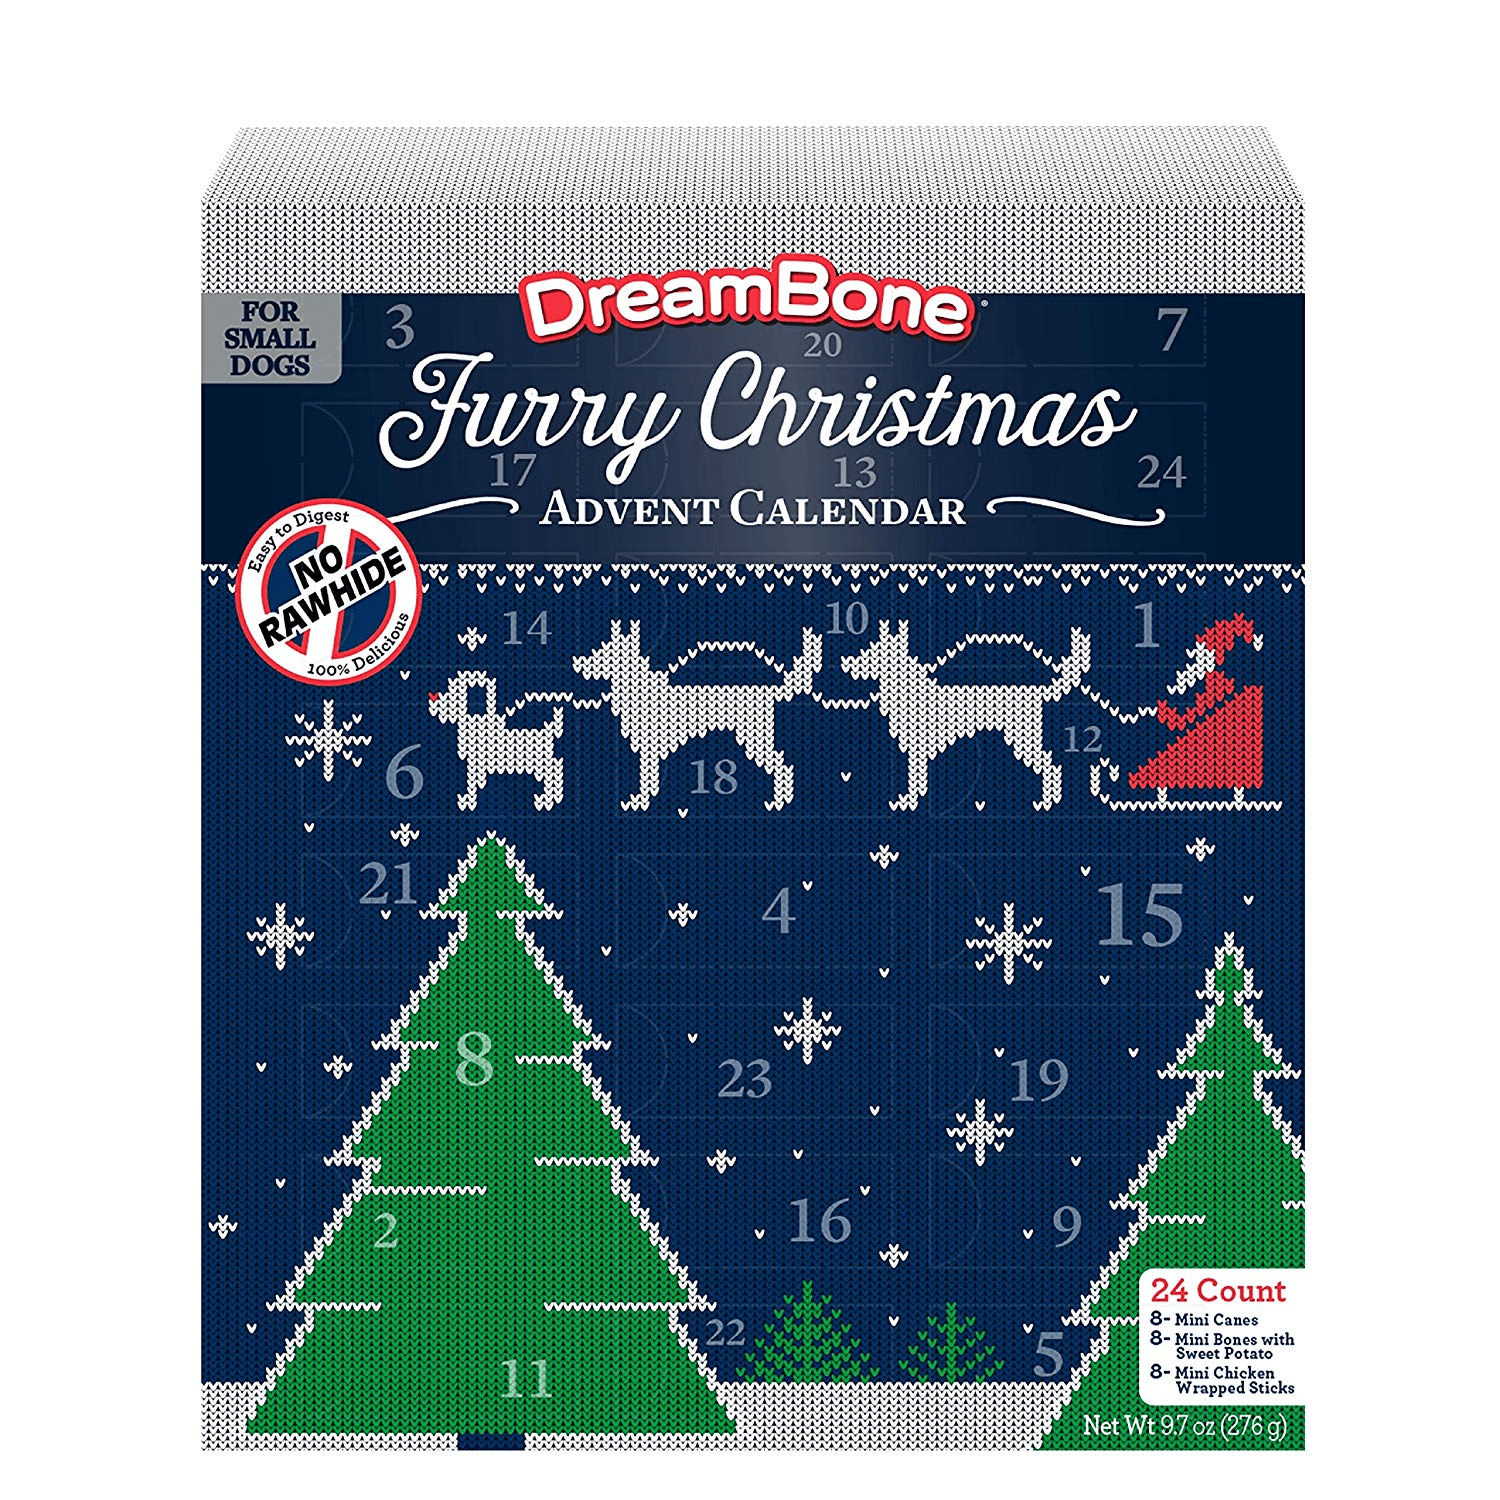 2019 DreamBone Furry Christmas Advent Calendar for Dogs Available Now